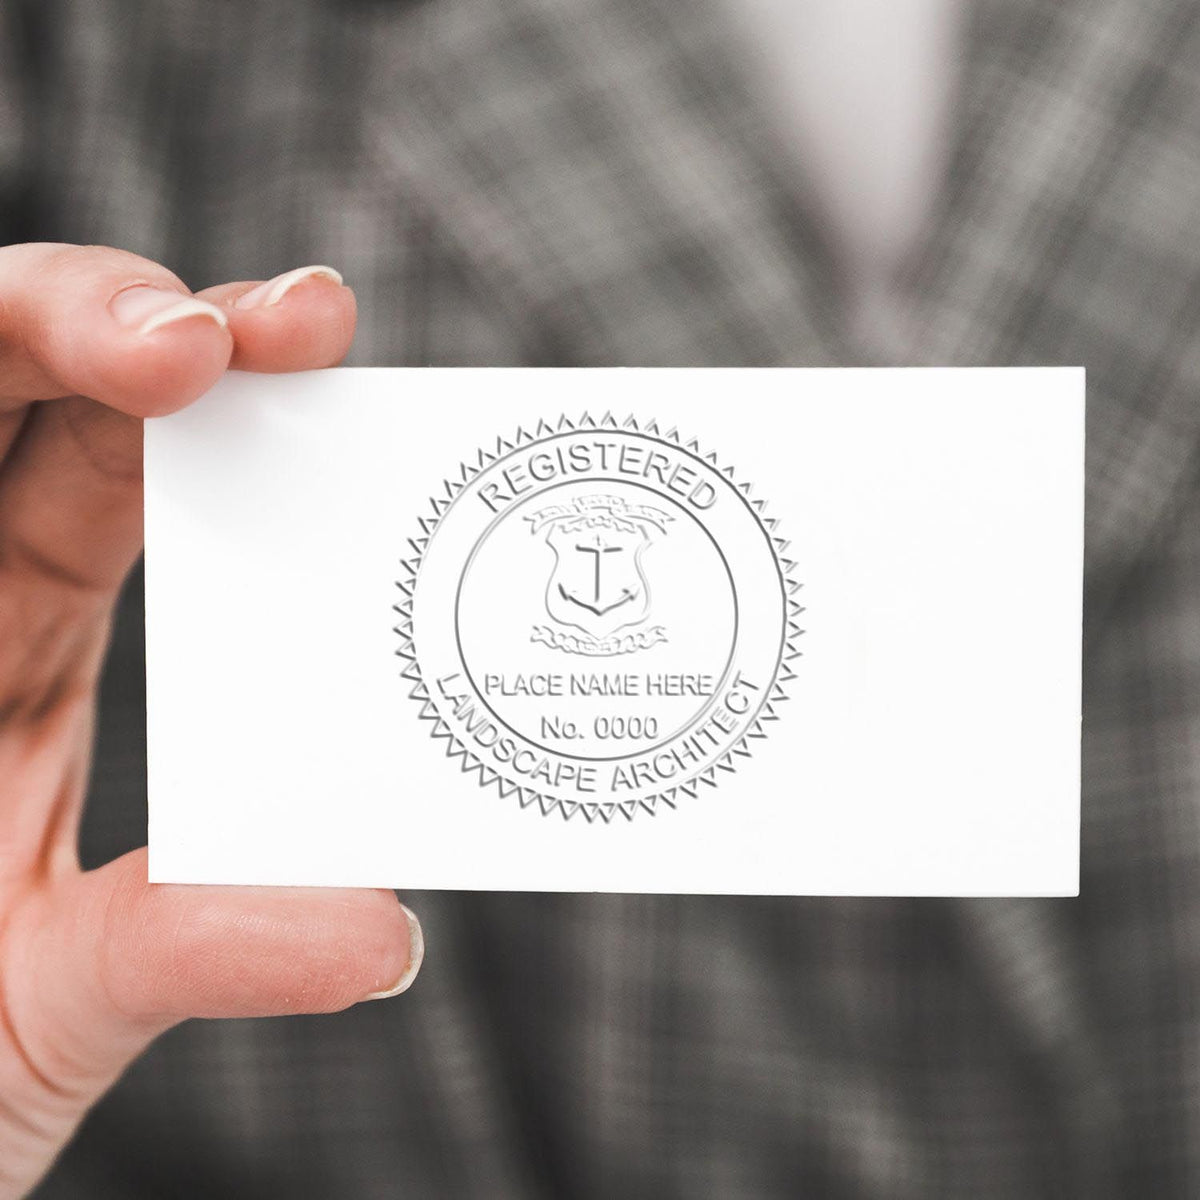 An alternative view of the Hybrid Rhode Island Landscape Architect Seal stamped on a sheet of paper showing the image in use